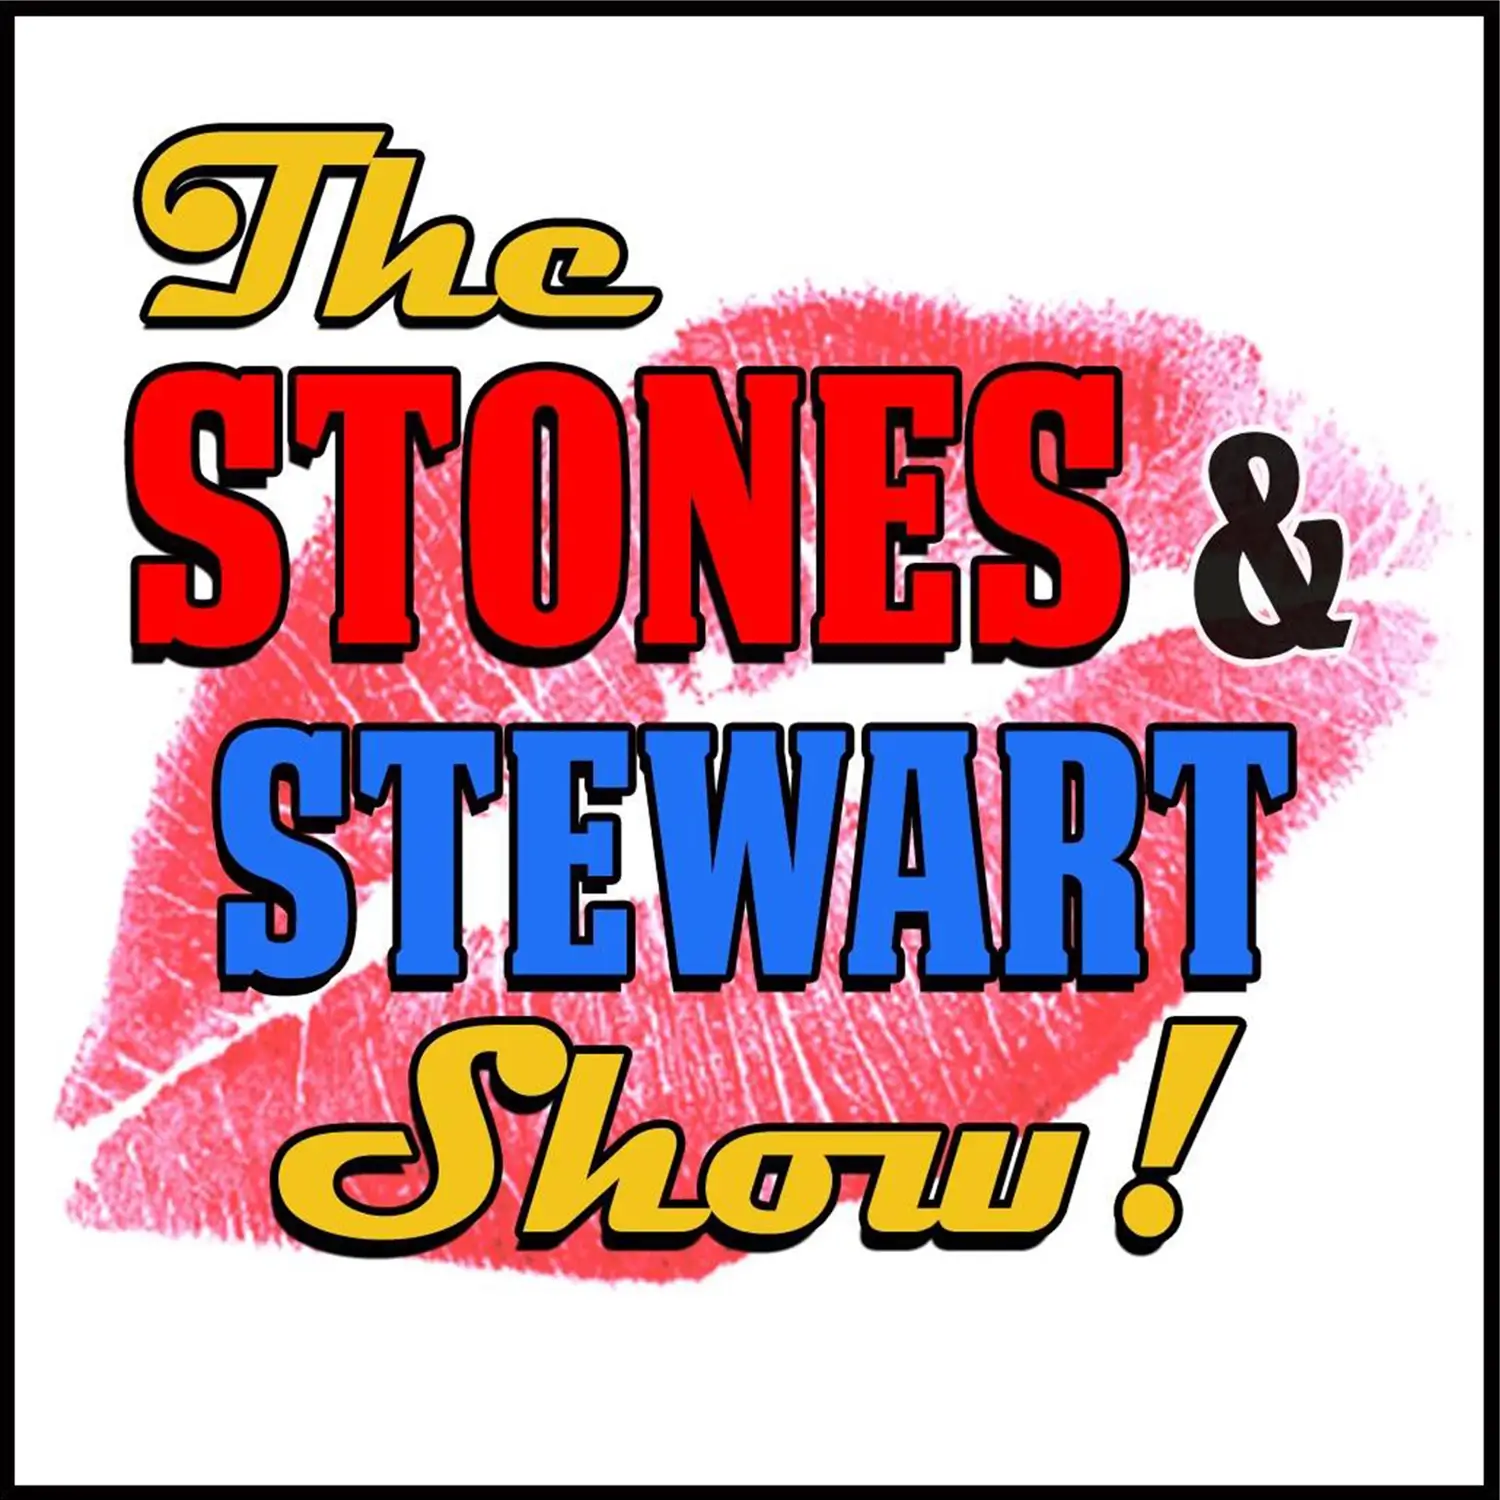 Stones & Stewart: Celebrating Rod Stewart and The Rolling Stones